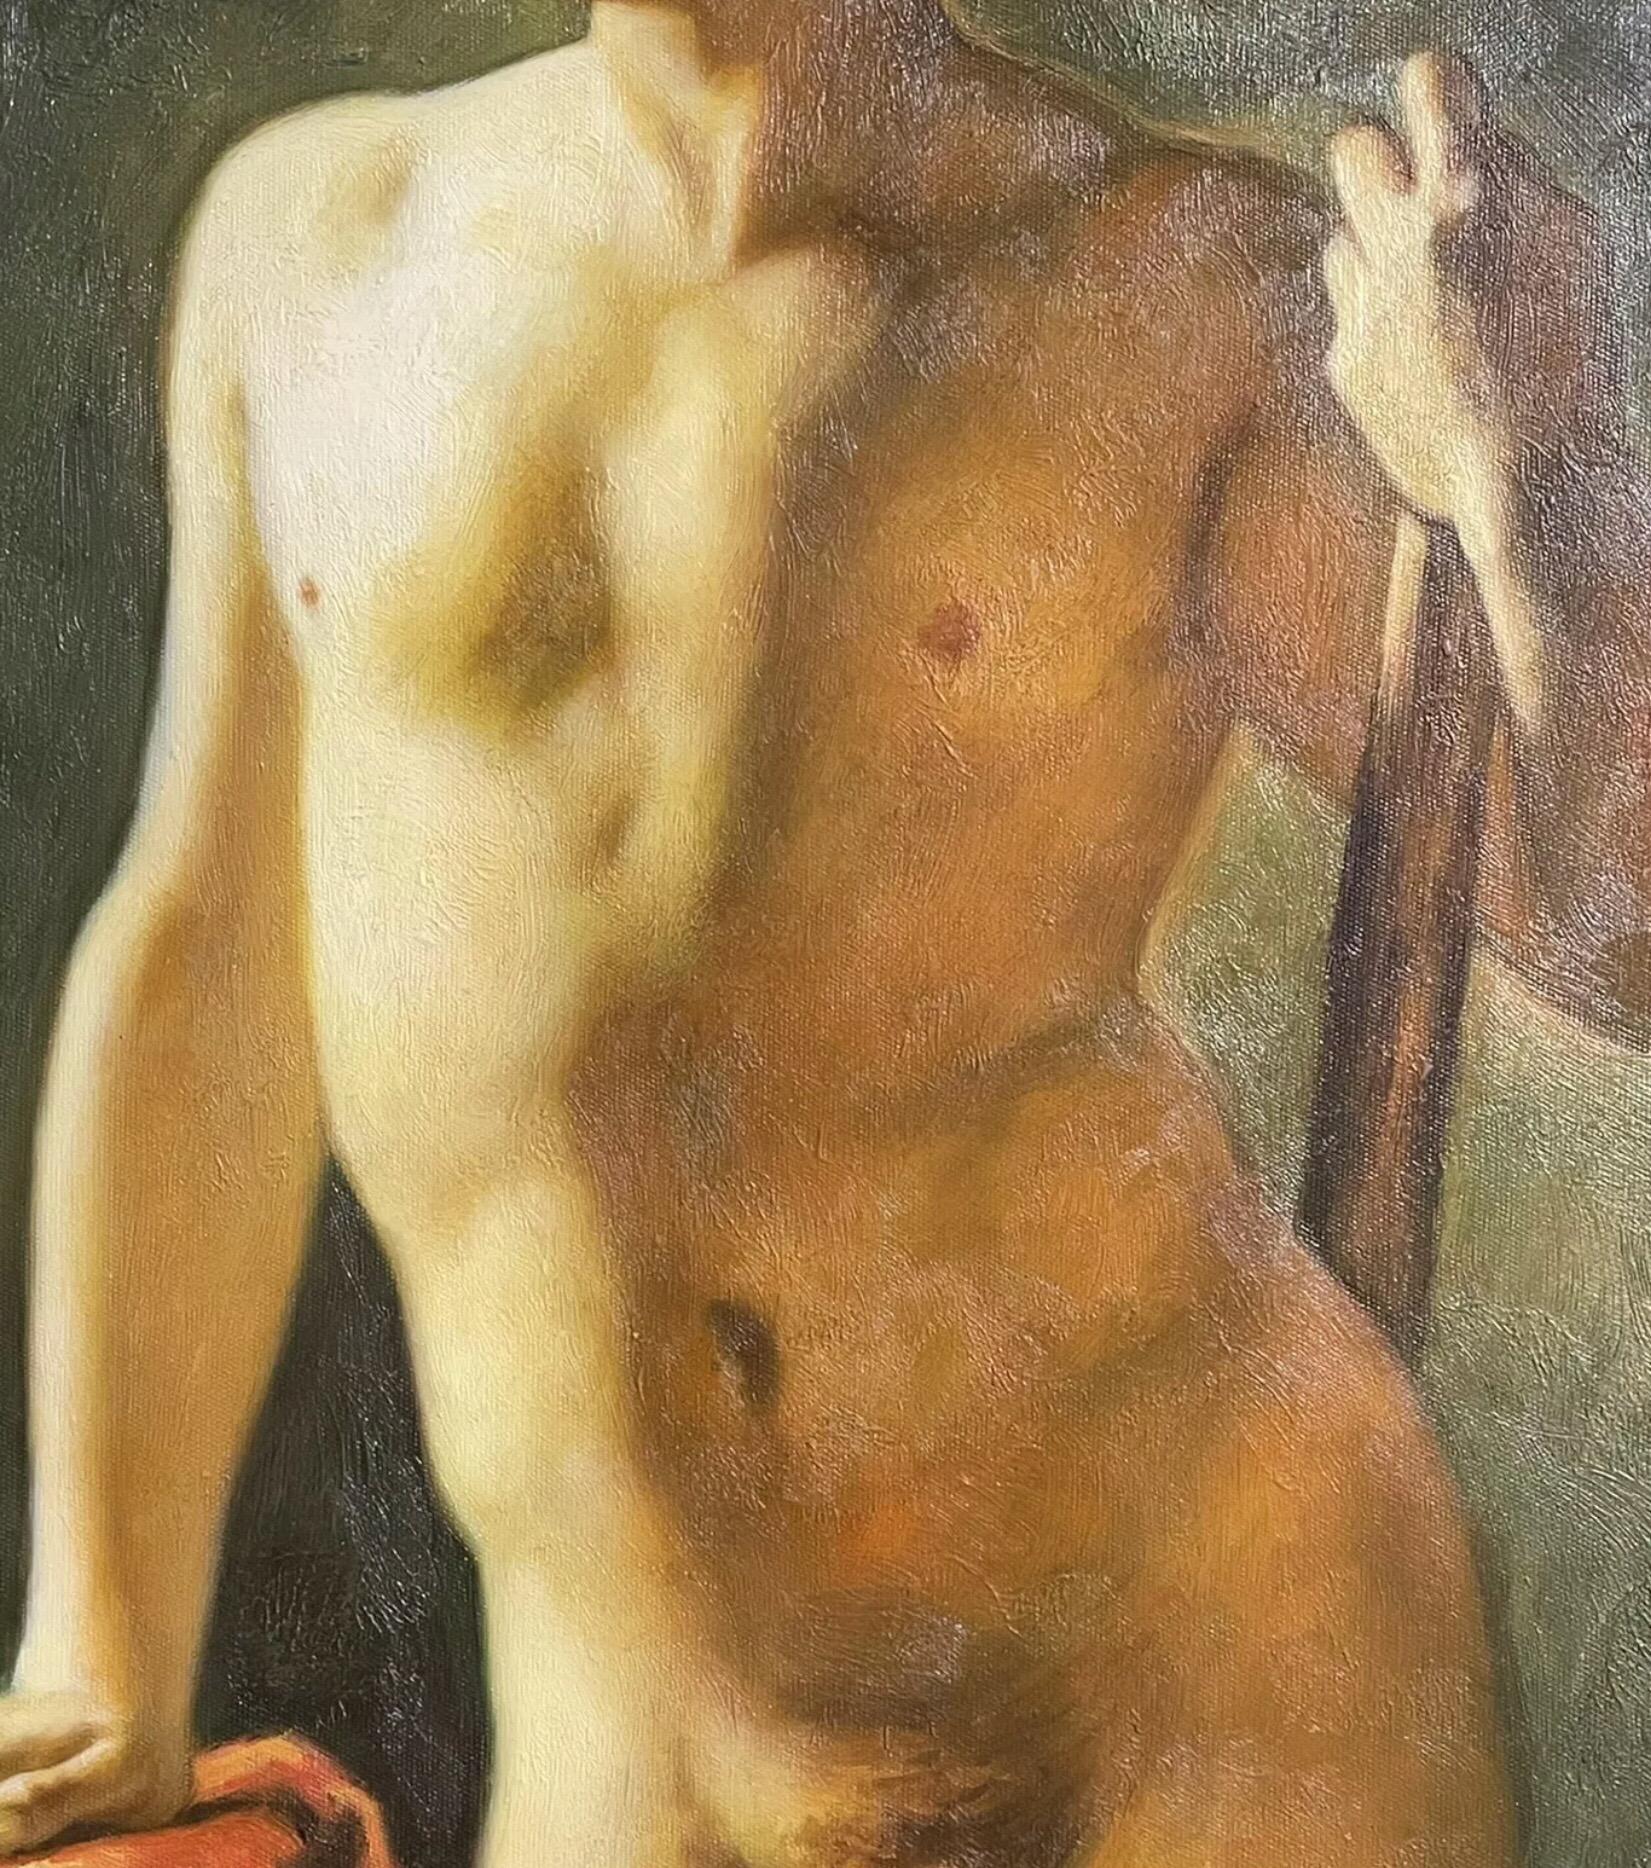 Artist/ School: British School, contemporary

Title: Classical Male Nude holding a staff. 

Medium: oil painting on canvas, framed.

Size:  painting: 20 x 16 inches, frame: 25.75 x 21.75 inches 

Provenance: from a collection in the UK. 

Condition: